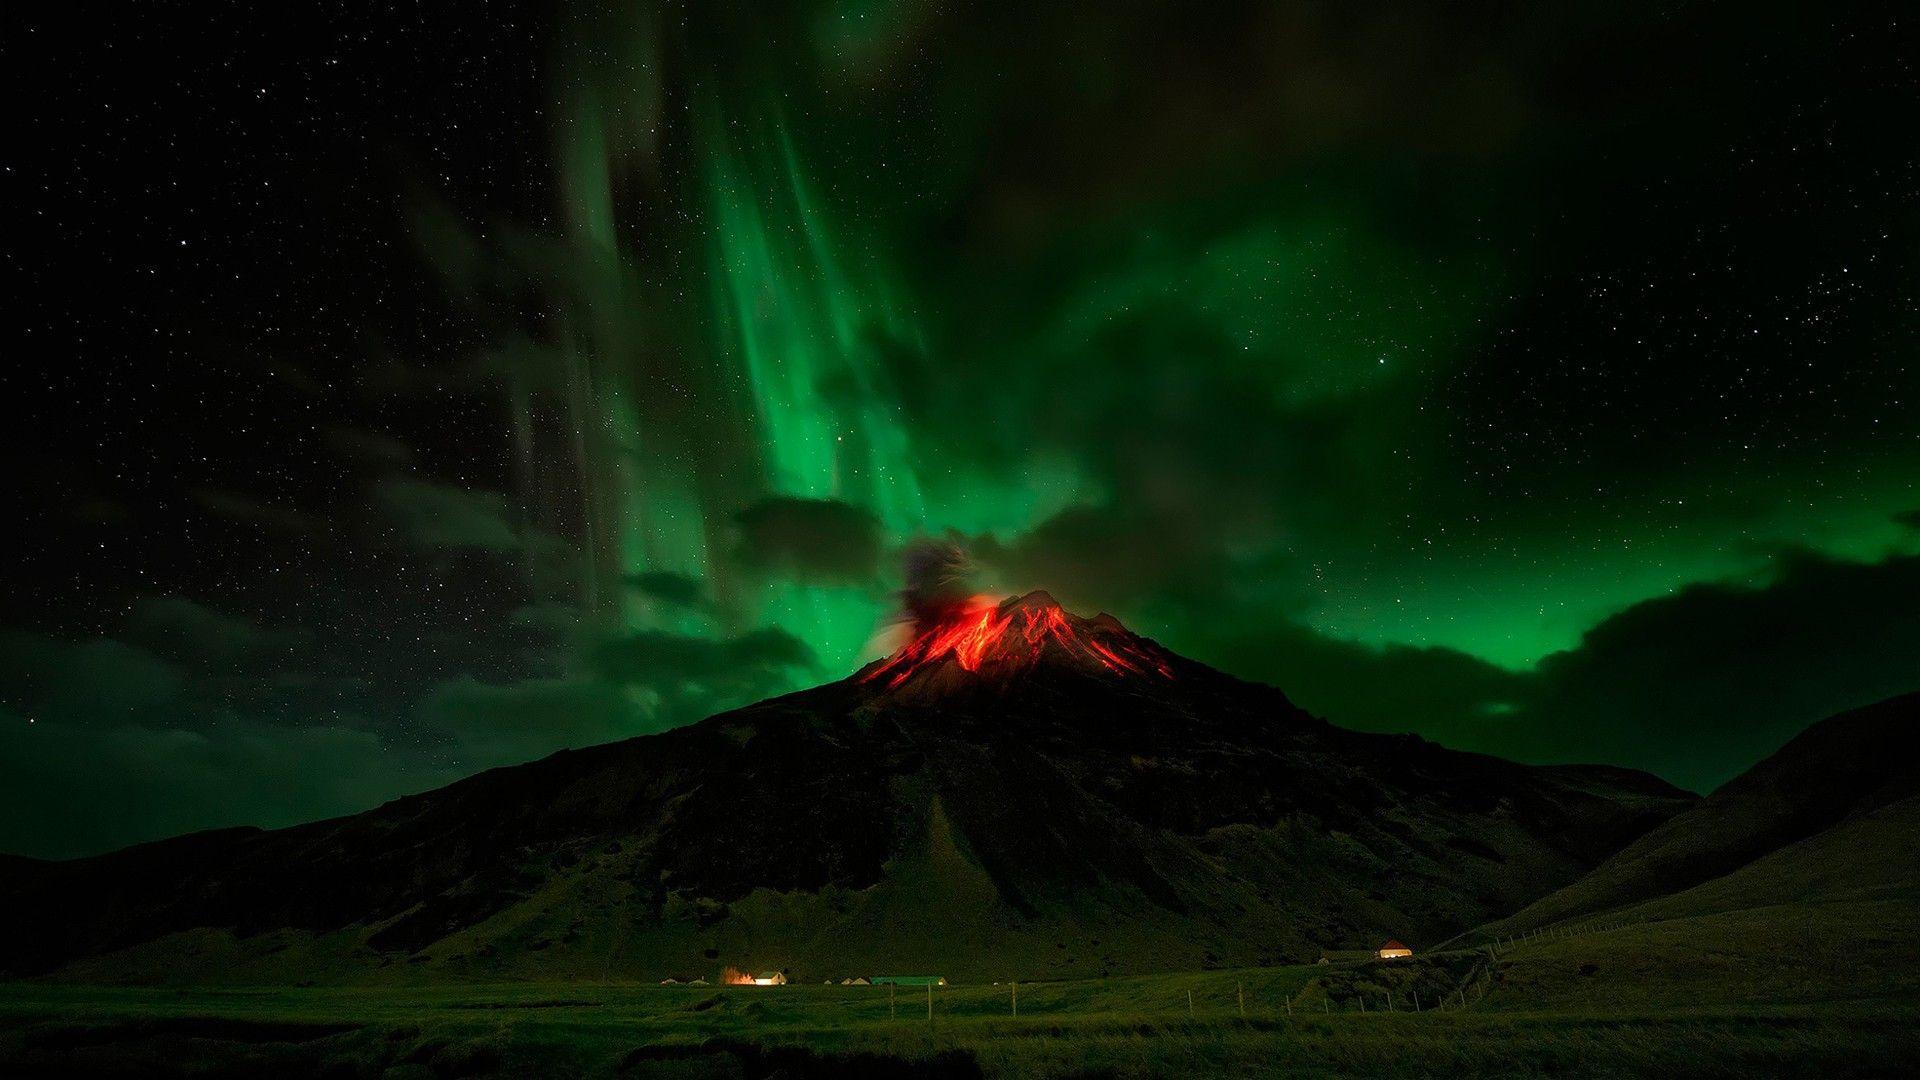 Northern Lights over a flaming volcano wallpaper and image